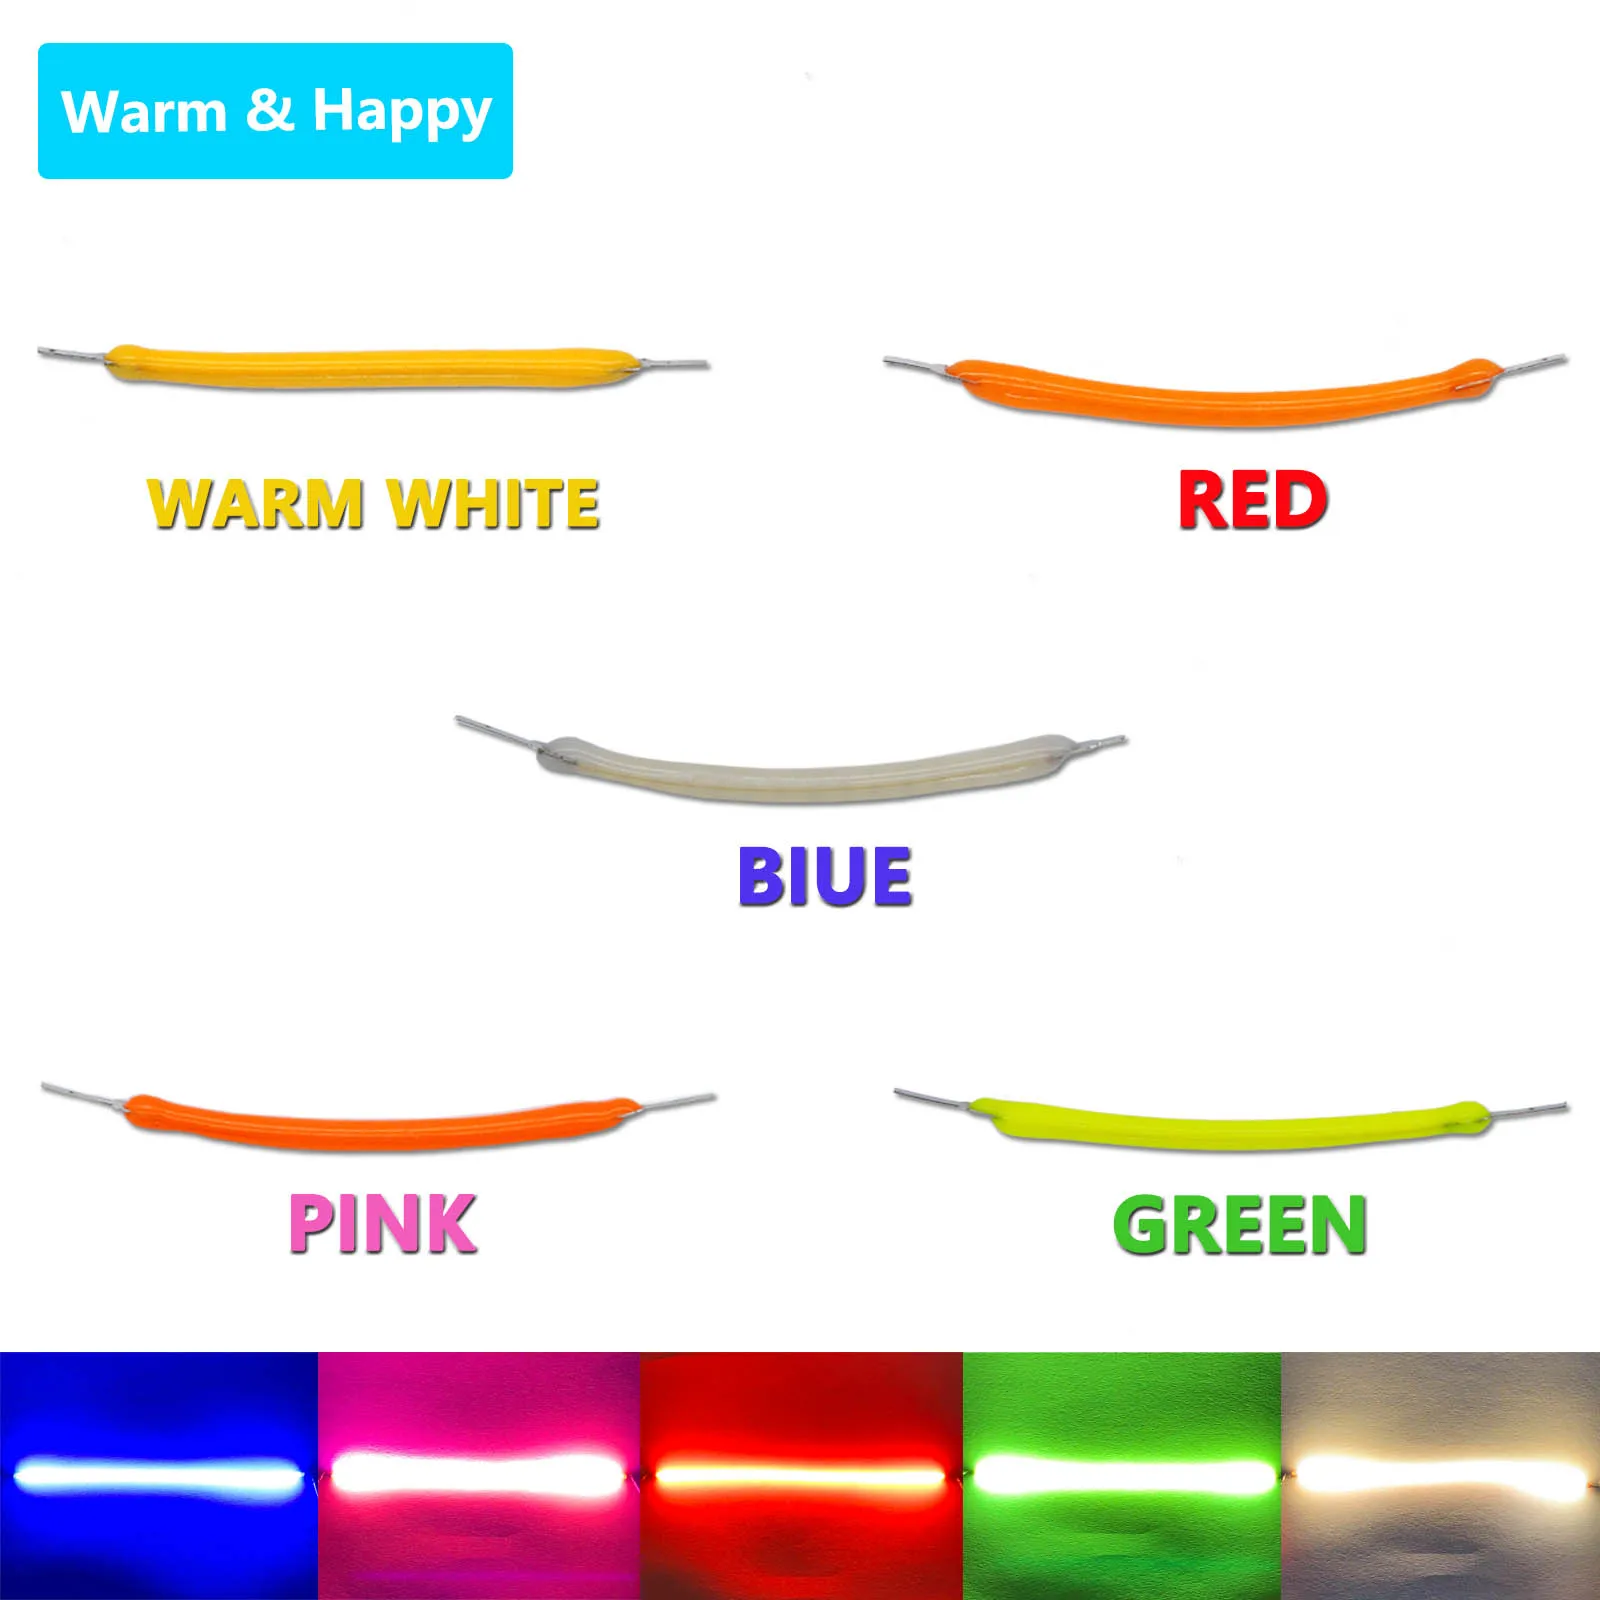 1pcs  LED Retro Light Bulb DC3V 100mA Flexible Filament Nine Sizes Indoor and Outdoor Lighting Decoration Accessories DIY rgb flexible led display bluetooth programmable sign module strip light diy mask hat clothes bag shoes word scroll matrix screen